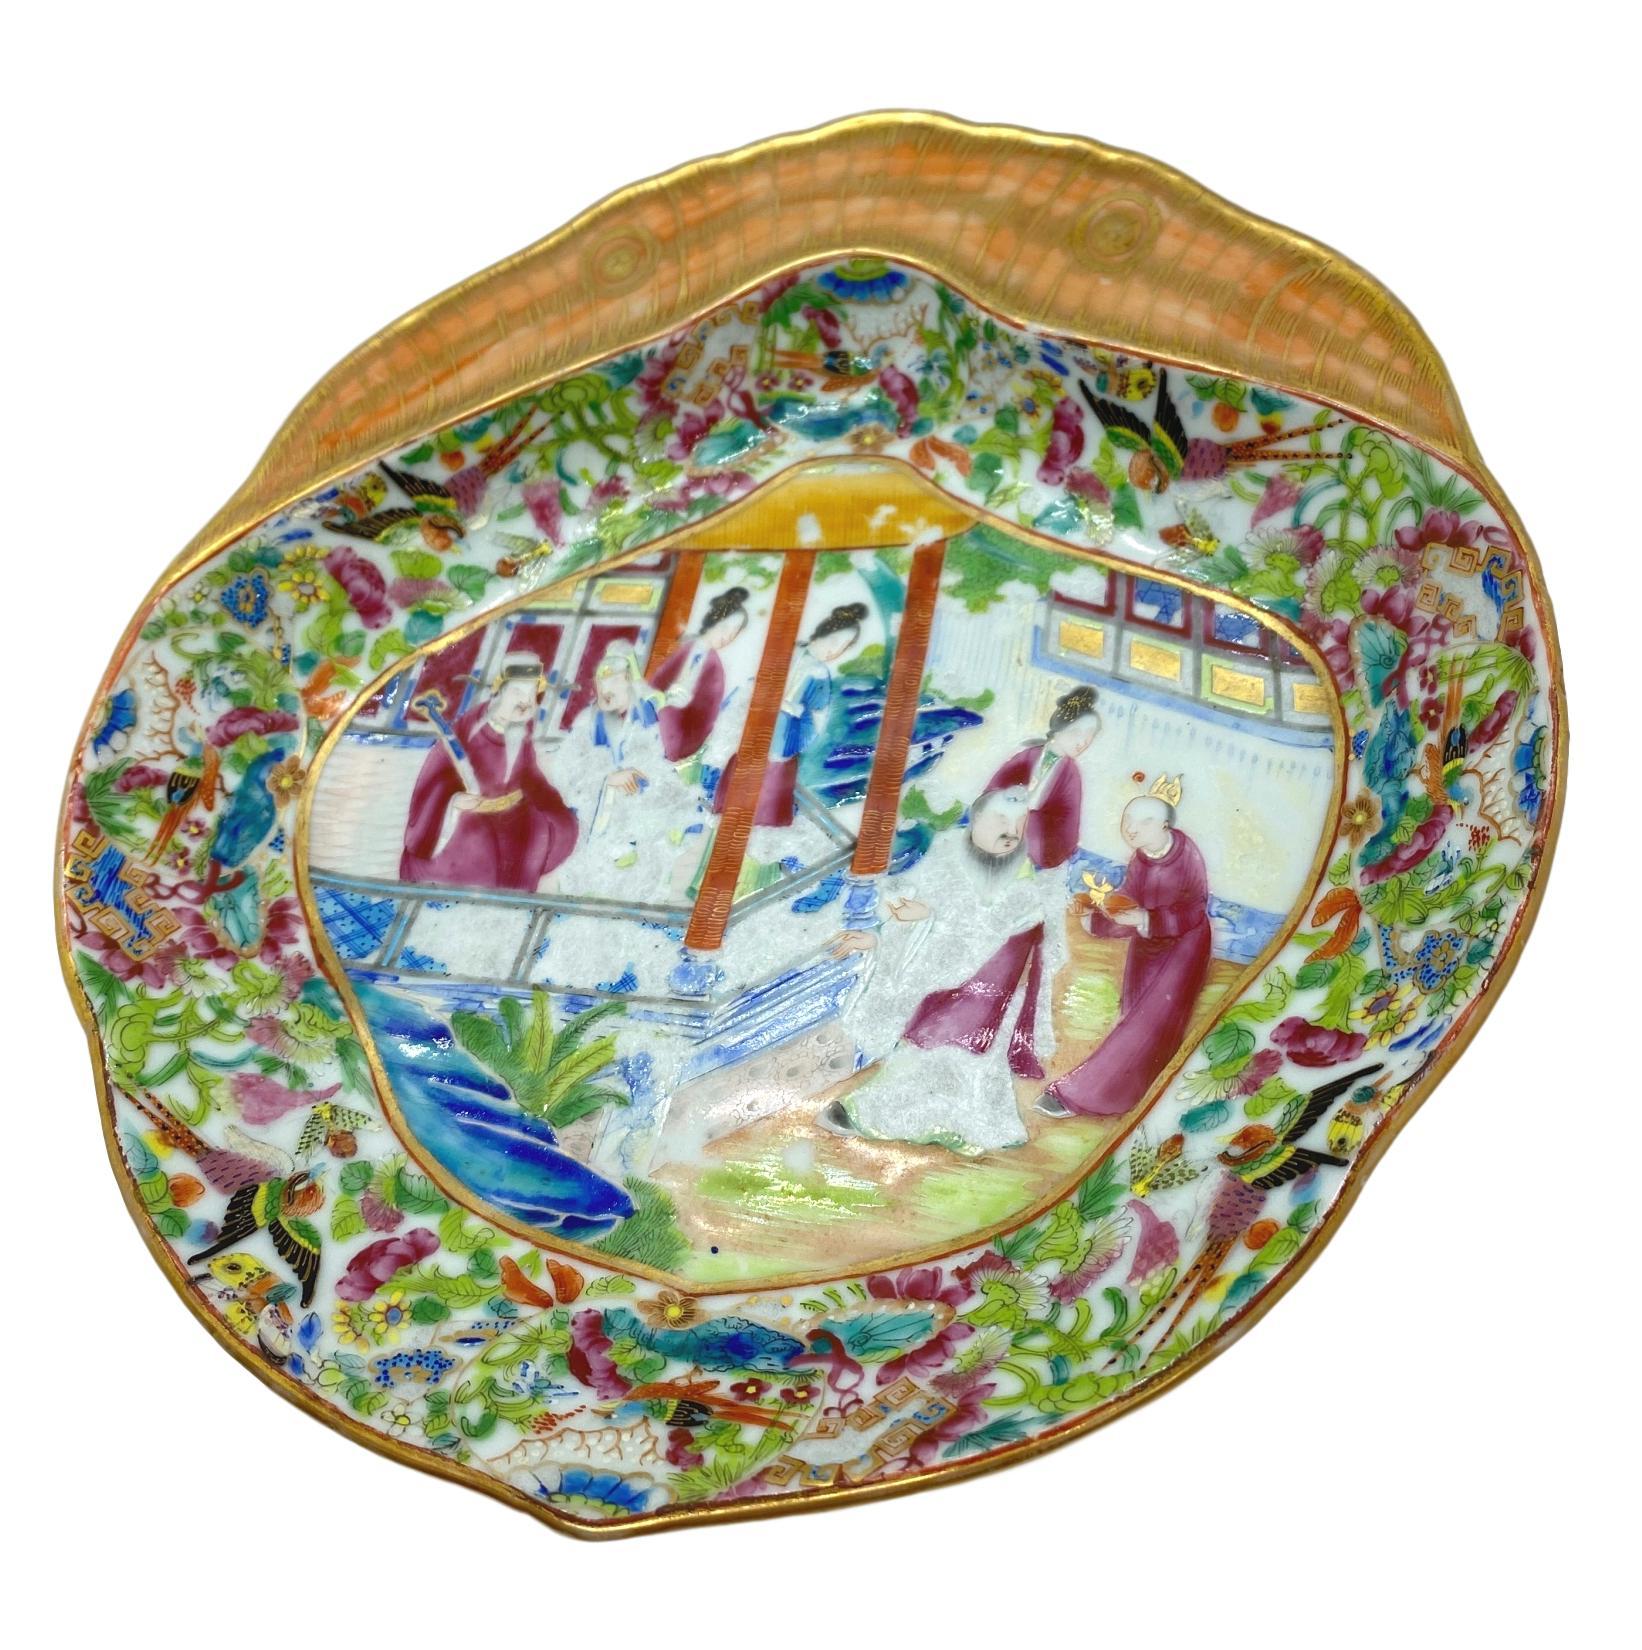 Chinese Export Porcelain Rose Mandarin Shell-Form Shrimp Dish, also known as a nappie or dessert dish, circa 1820, the shaped bowl with vividly enameled glazes and detailed gilding, with an elaborately gilded and enameled molded flange handle or